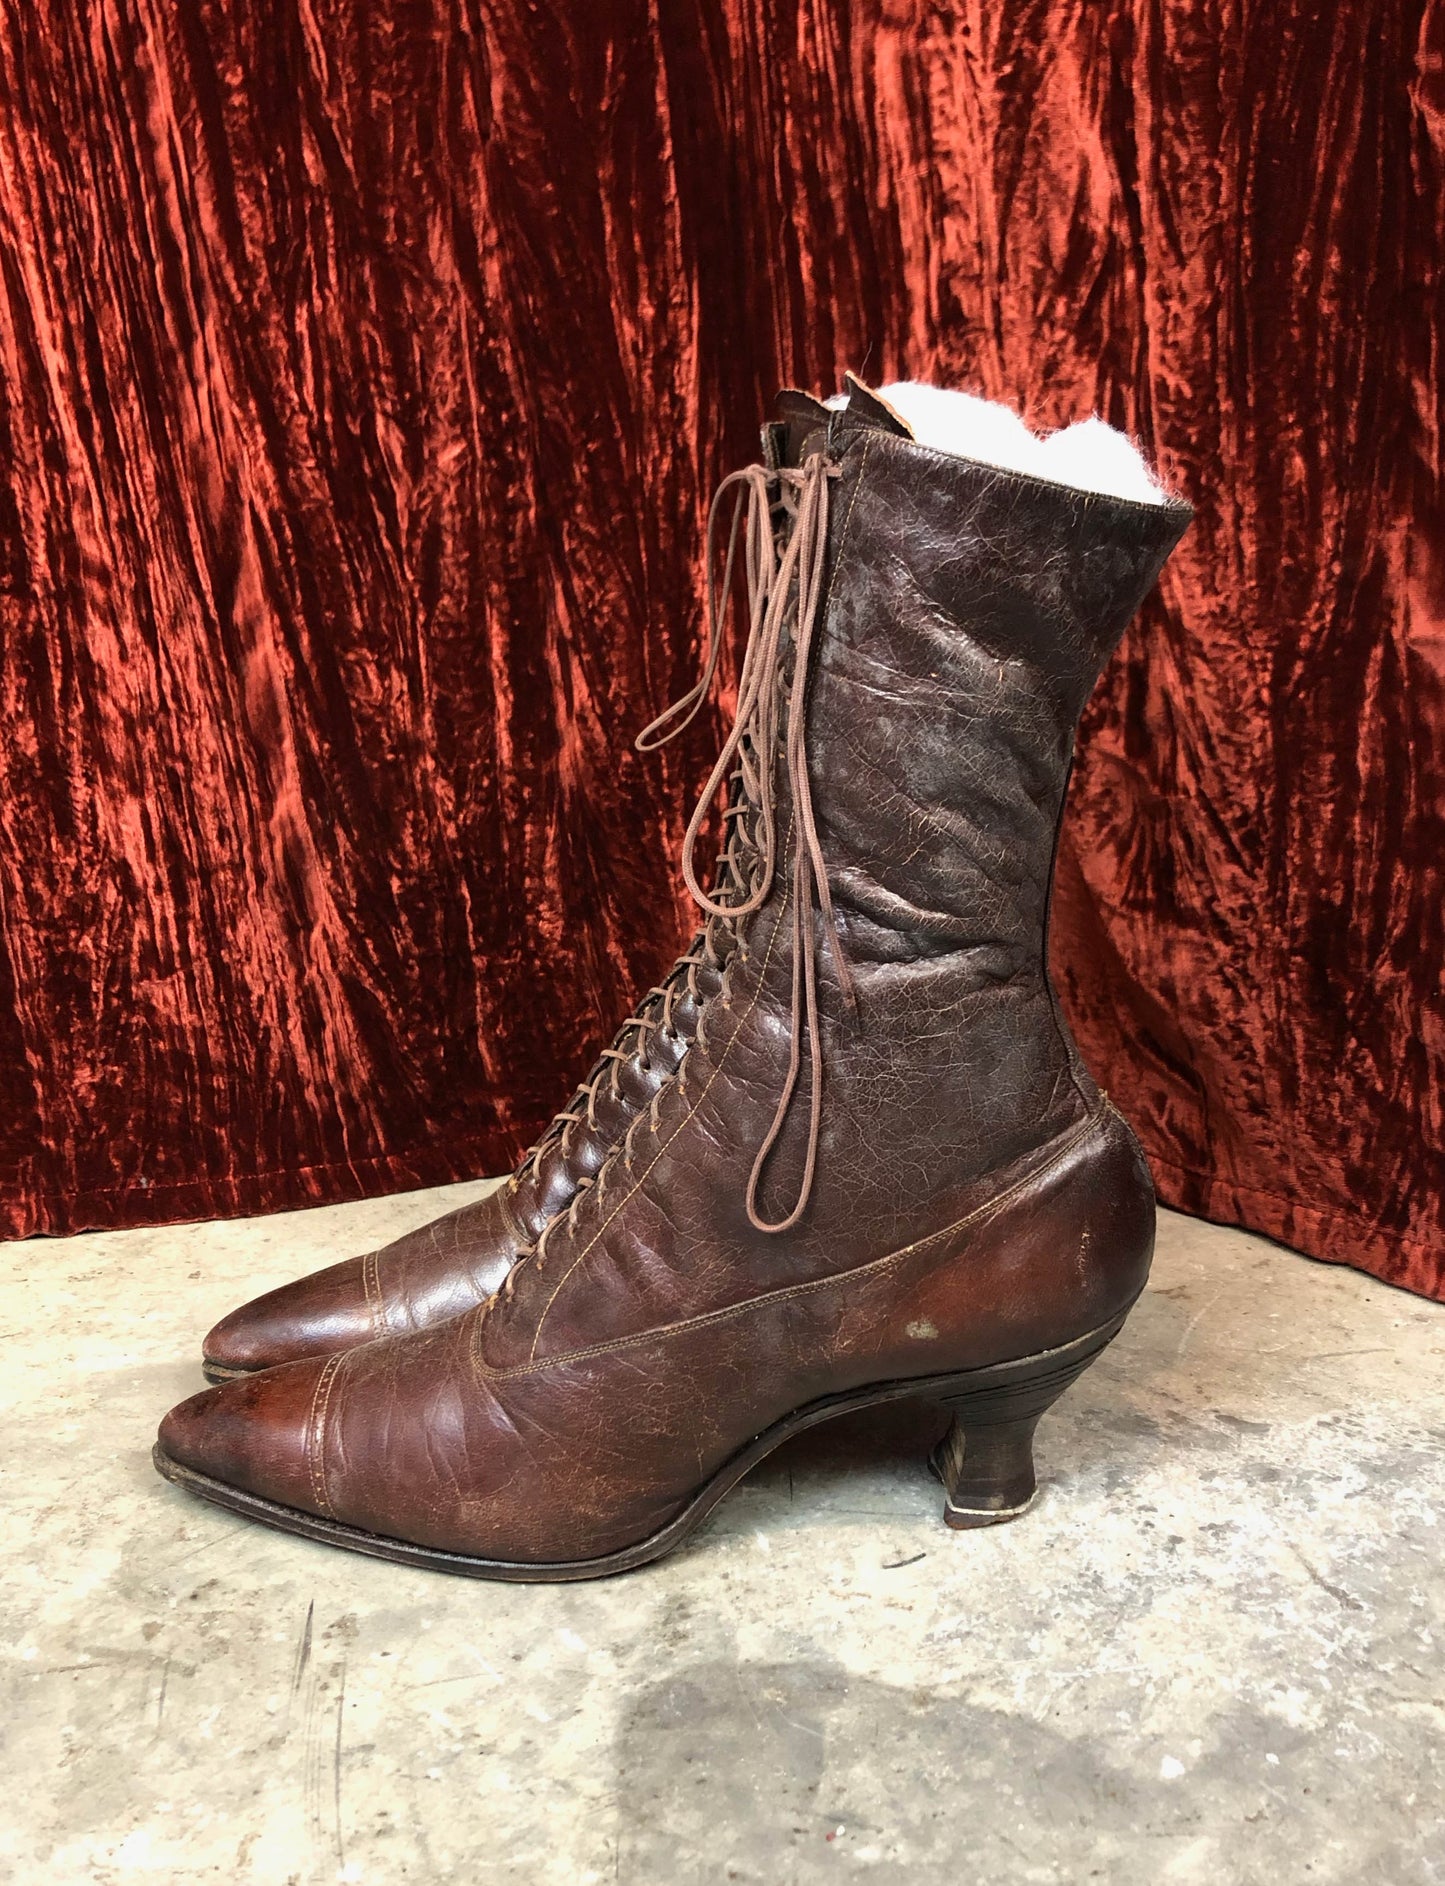 Antique Turn Of The Century Victorian Edwardian Brown Leather Lace Up Boots - Women's 7